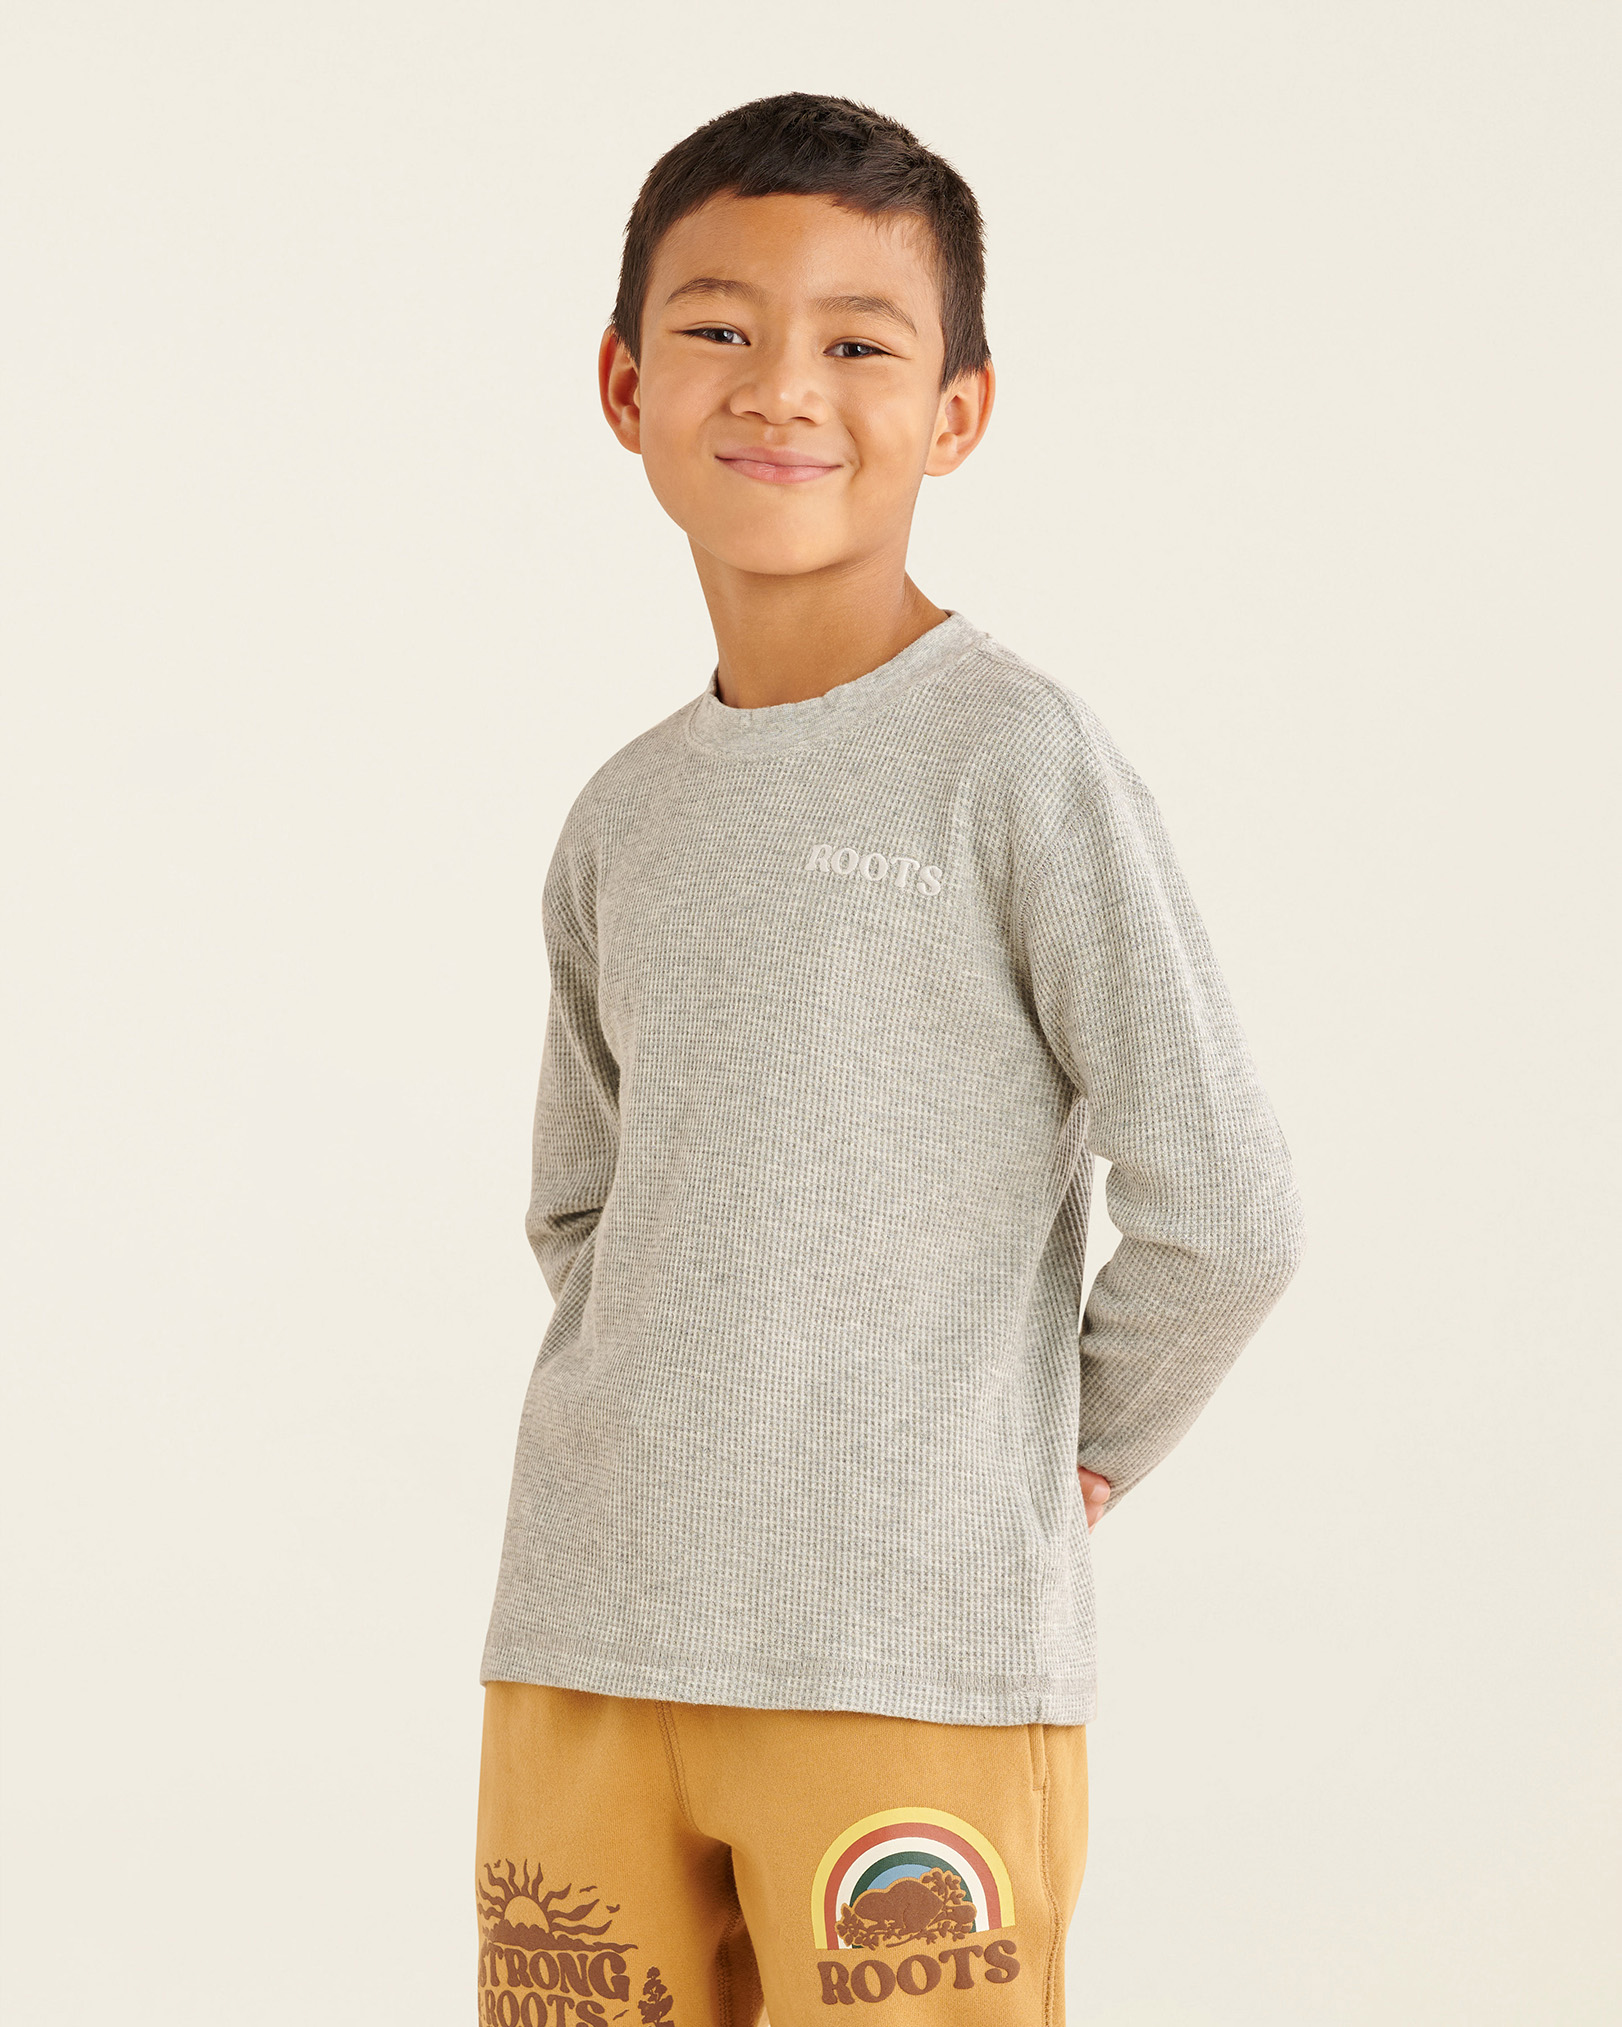 Roots Kids Waffle T-Shirt in Grey Mix